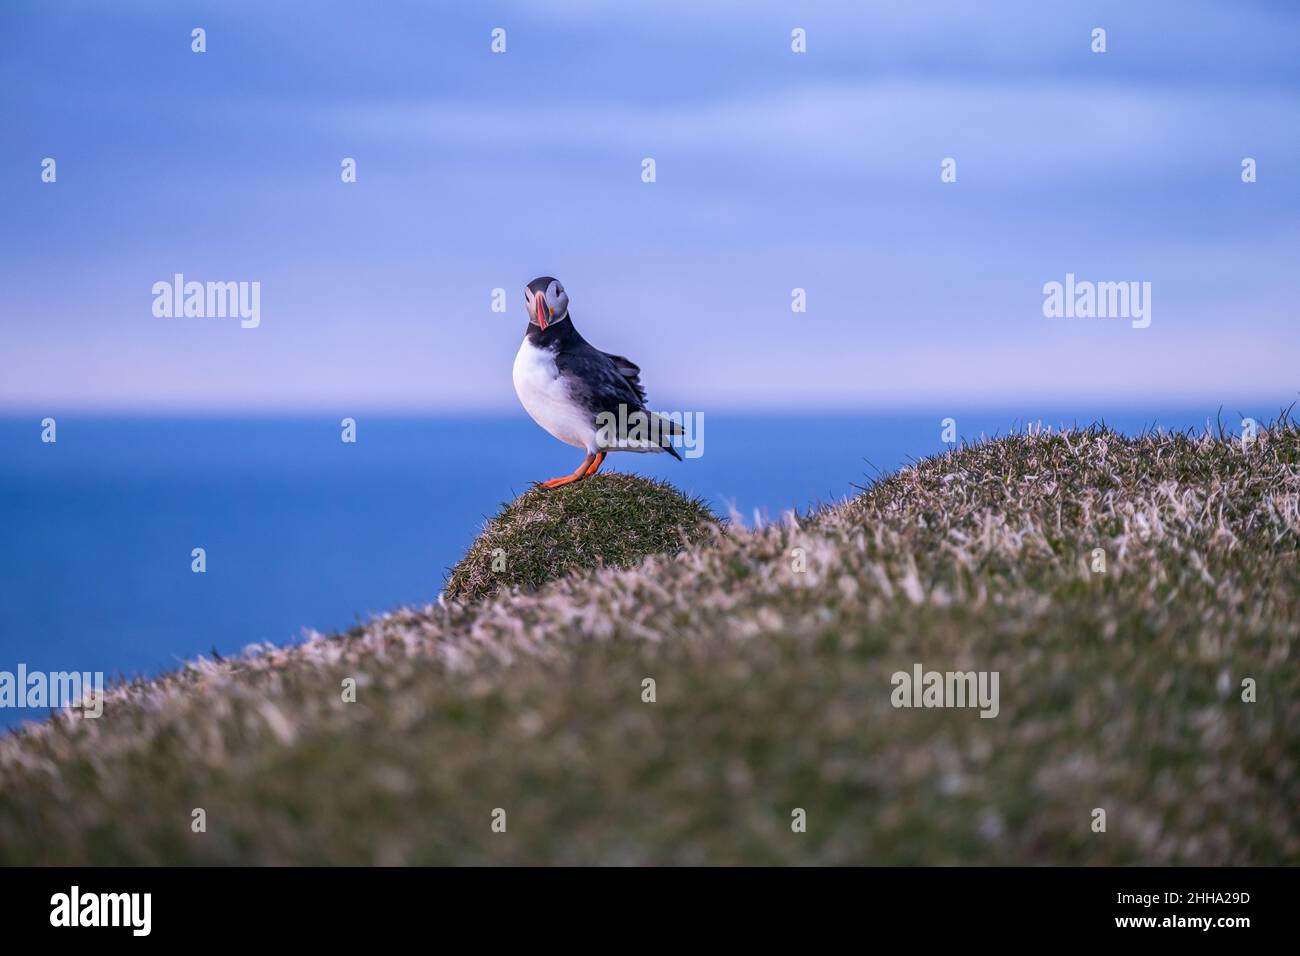 A portrait of a puffing looking straight at the camera, in Faroe Islands. Stock Photo